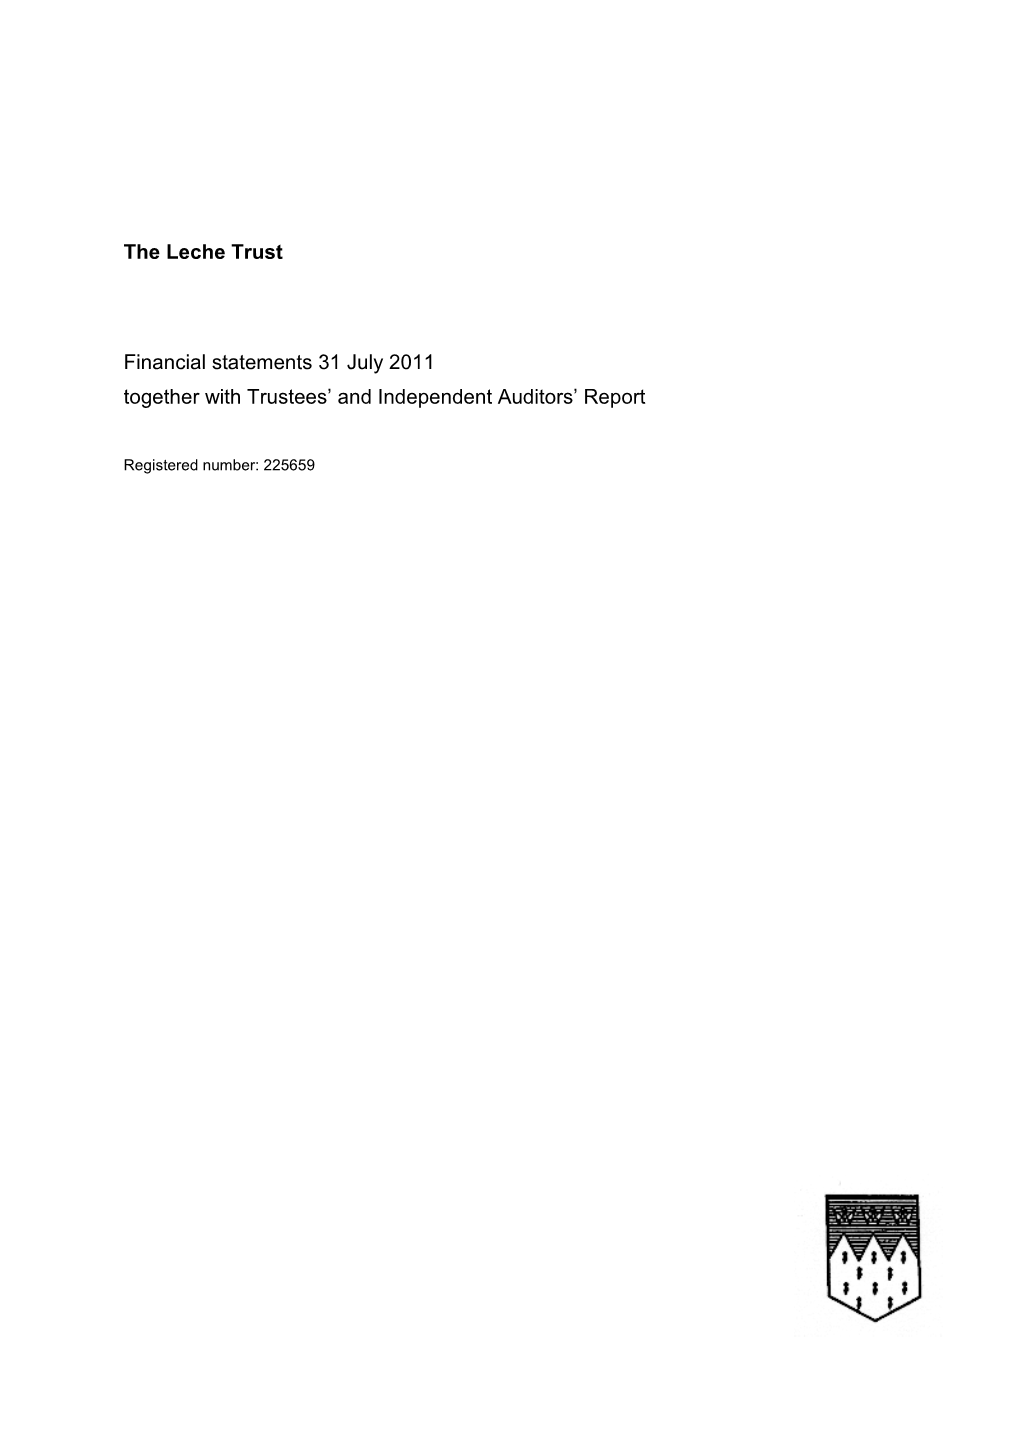 The Leche Trust Financial Statements 31 July 2011 Together with Trustees